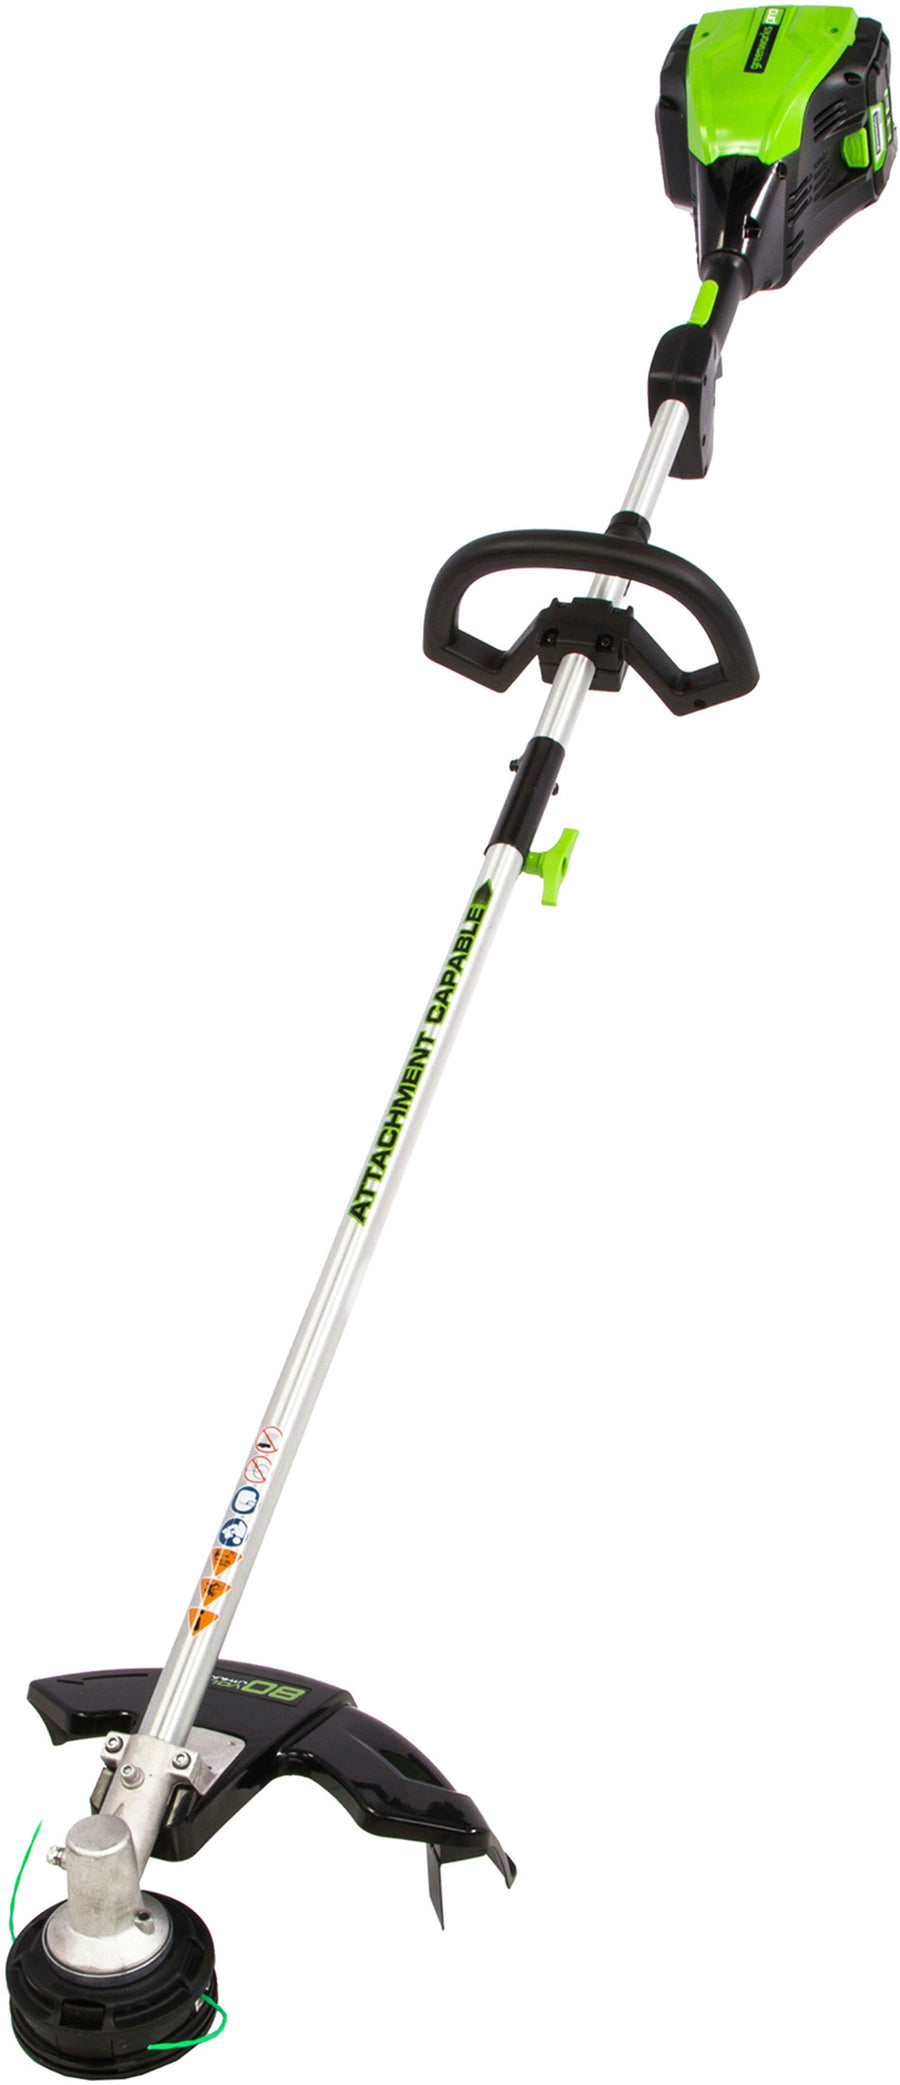 Greenworks - Refurbished 80V 16" Cutting Diameter Brushless Straight Shaft Grass Trimmer 2.0 Ah Battery and Rapid Charger - Green_0